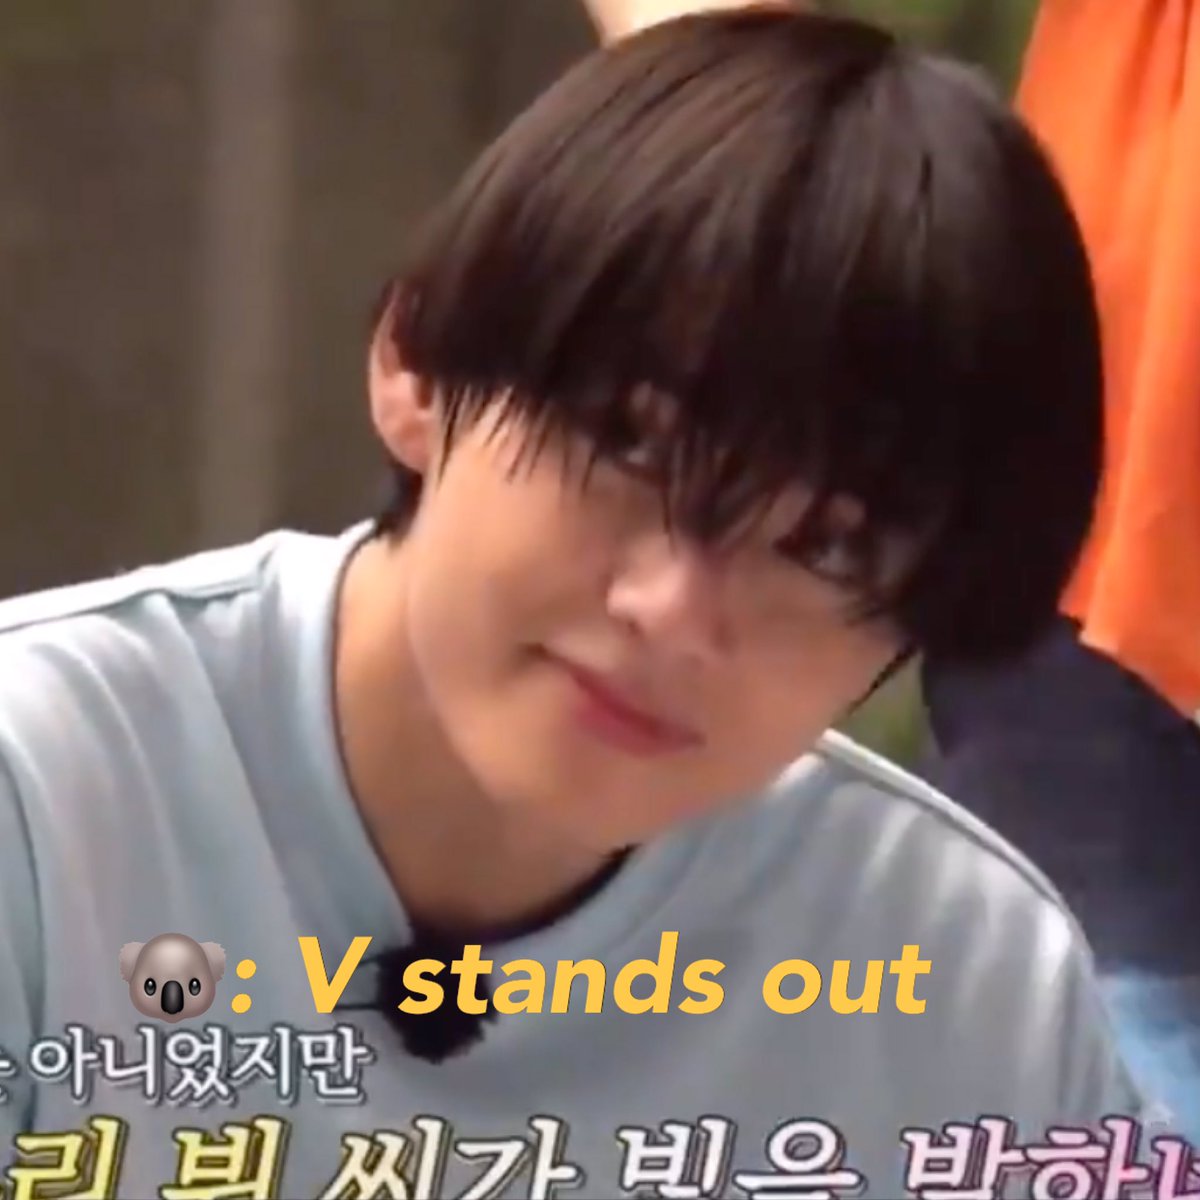 Taehyung being his intelligent self and quick witted ; an appreciation thread